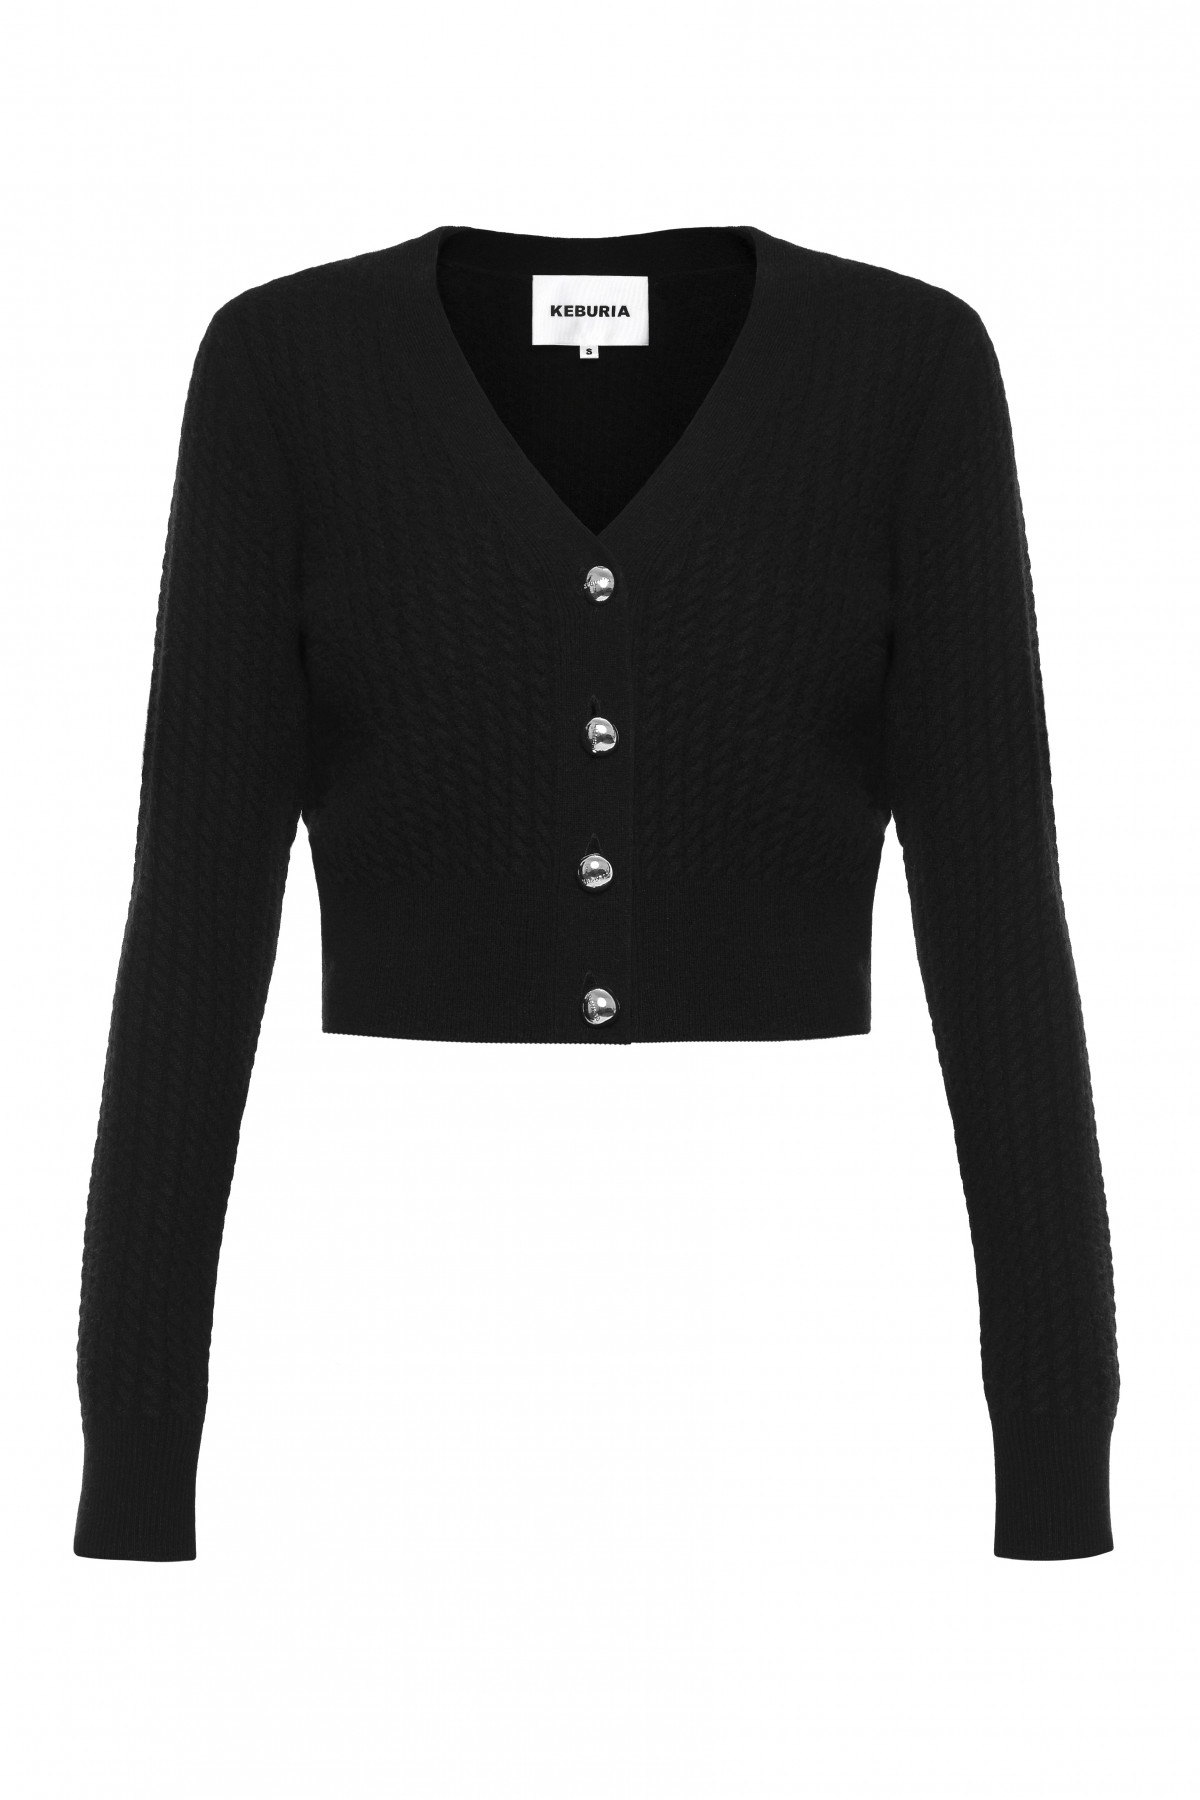 GEORGE KEBURIA - CABLE-KNIT WOOL-CASHMERE CARDIGAN